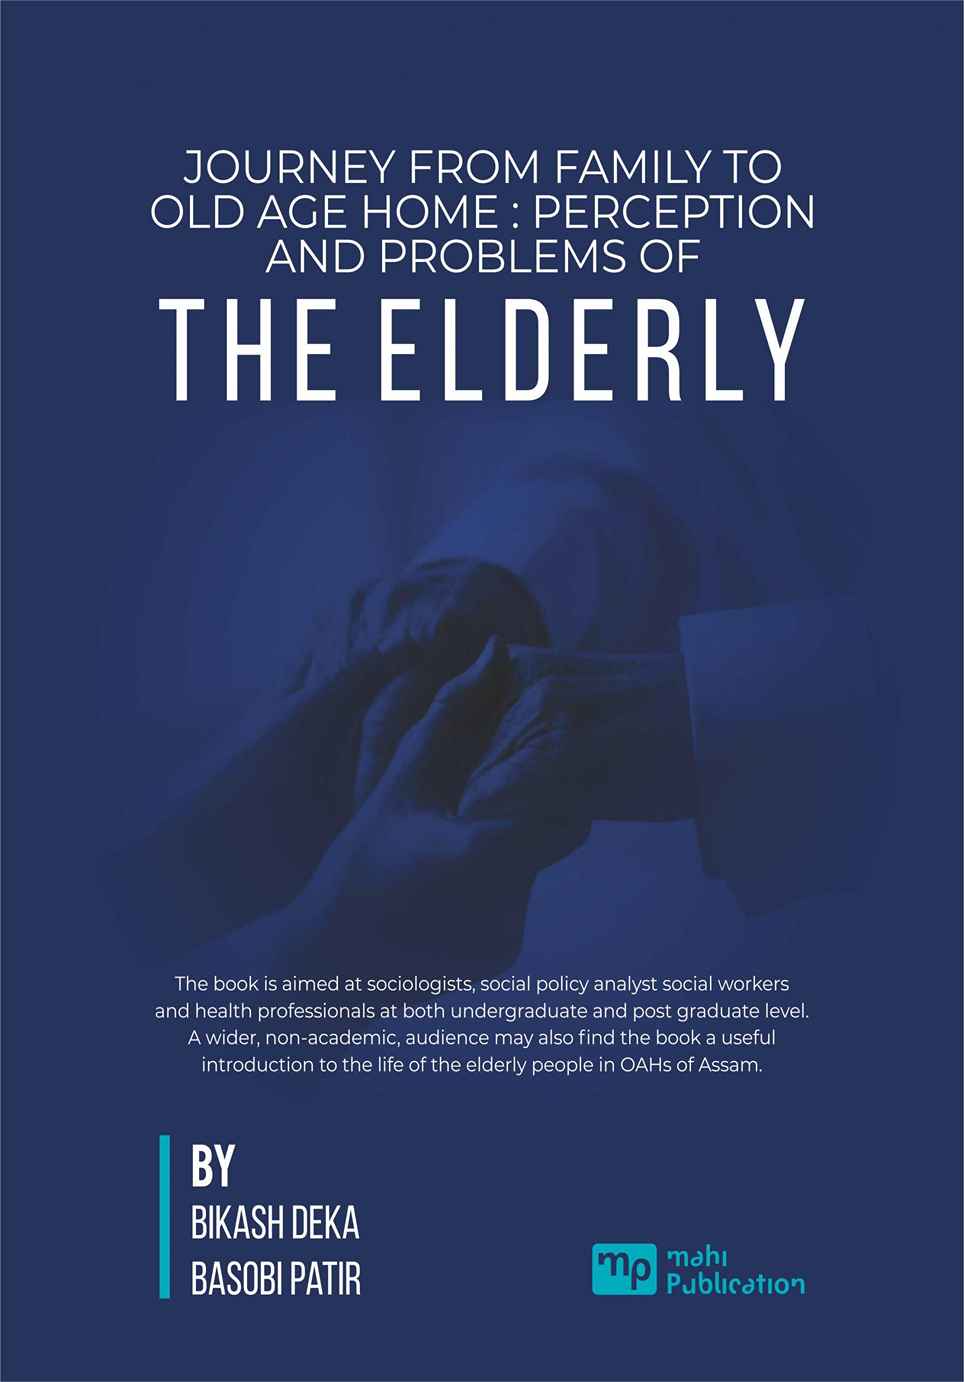  Journey From Family to Old Age Home: Perception and Problems of The Elderly